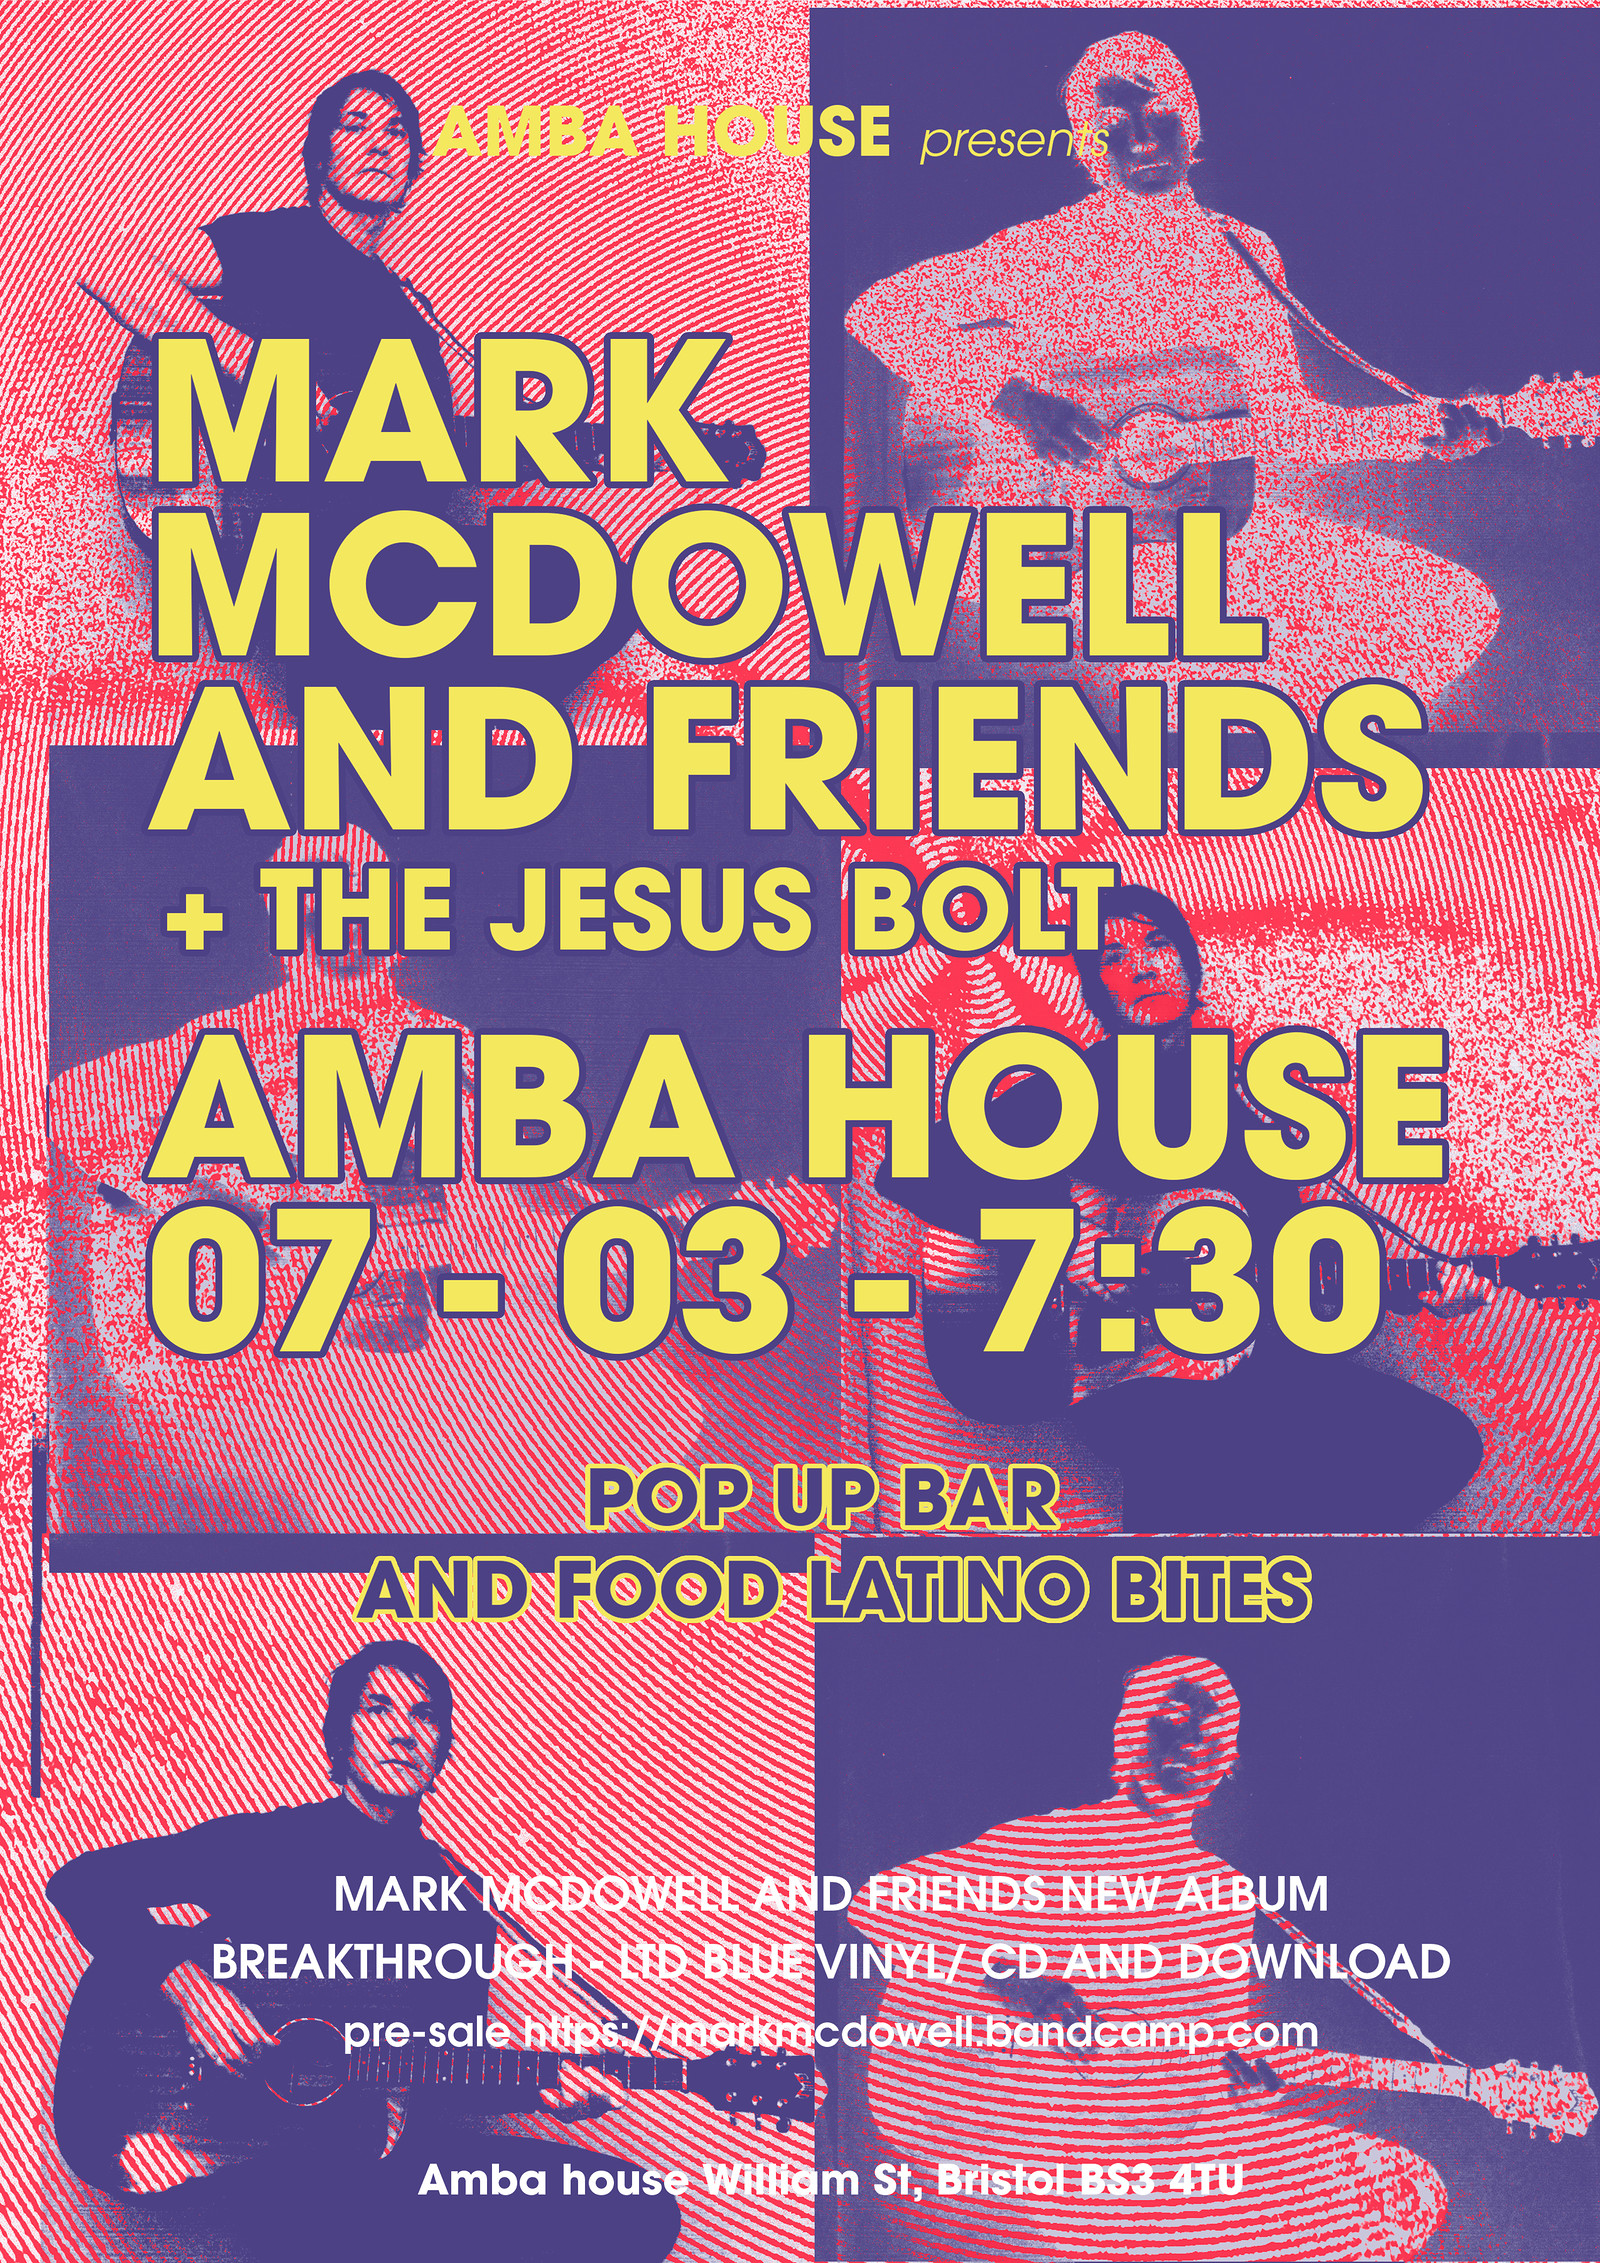 Mark McDowell and Friends + The Jesus Bolt at Amba House